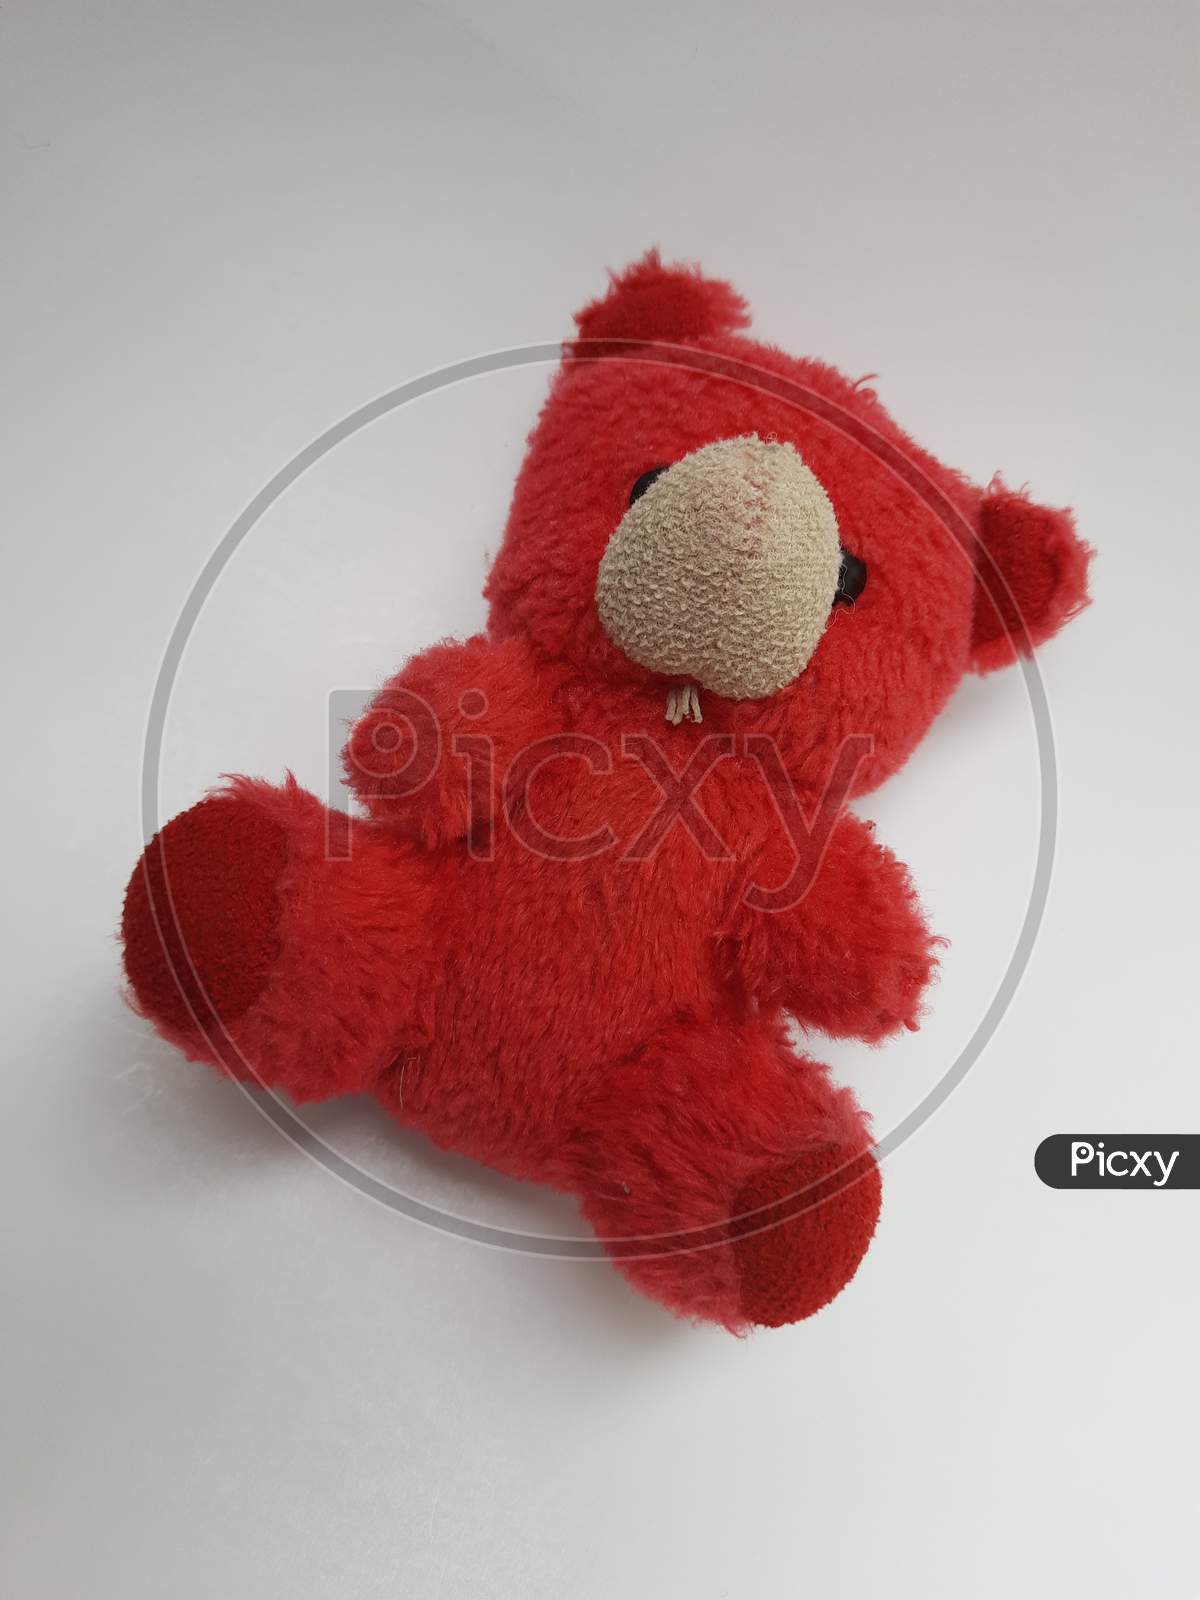 Small And Cute Toodles Stuffs Soft And Plush Red Color Red Teddy Bear Soft Toy Isolated On White Background